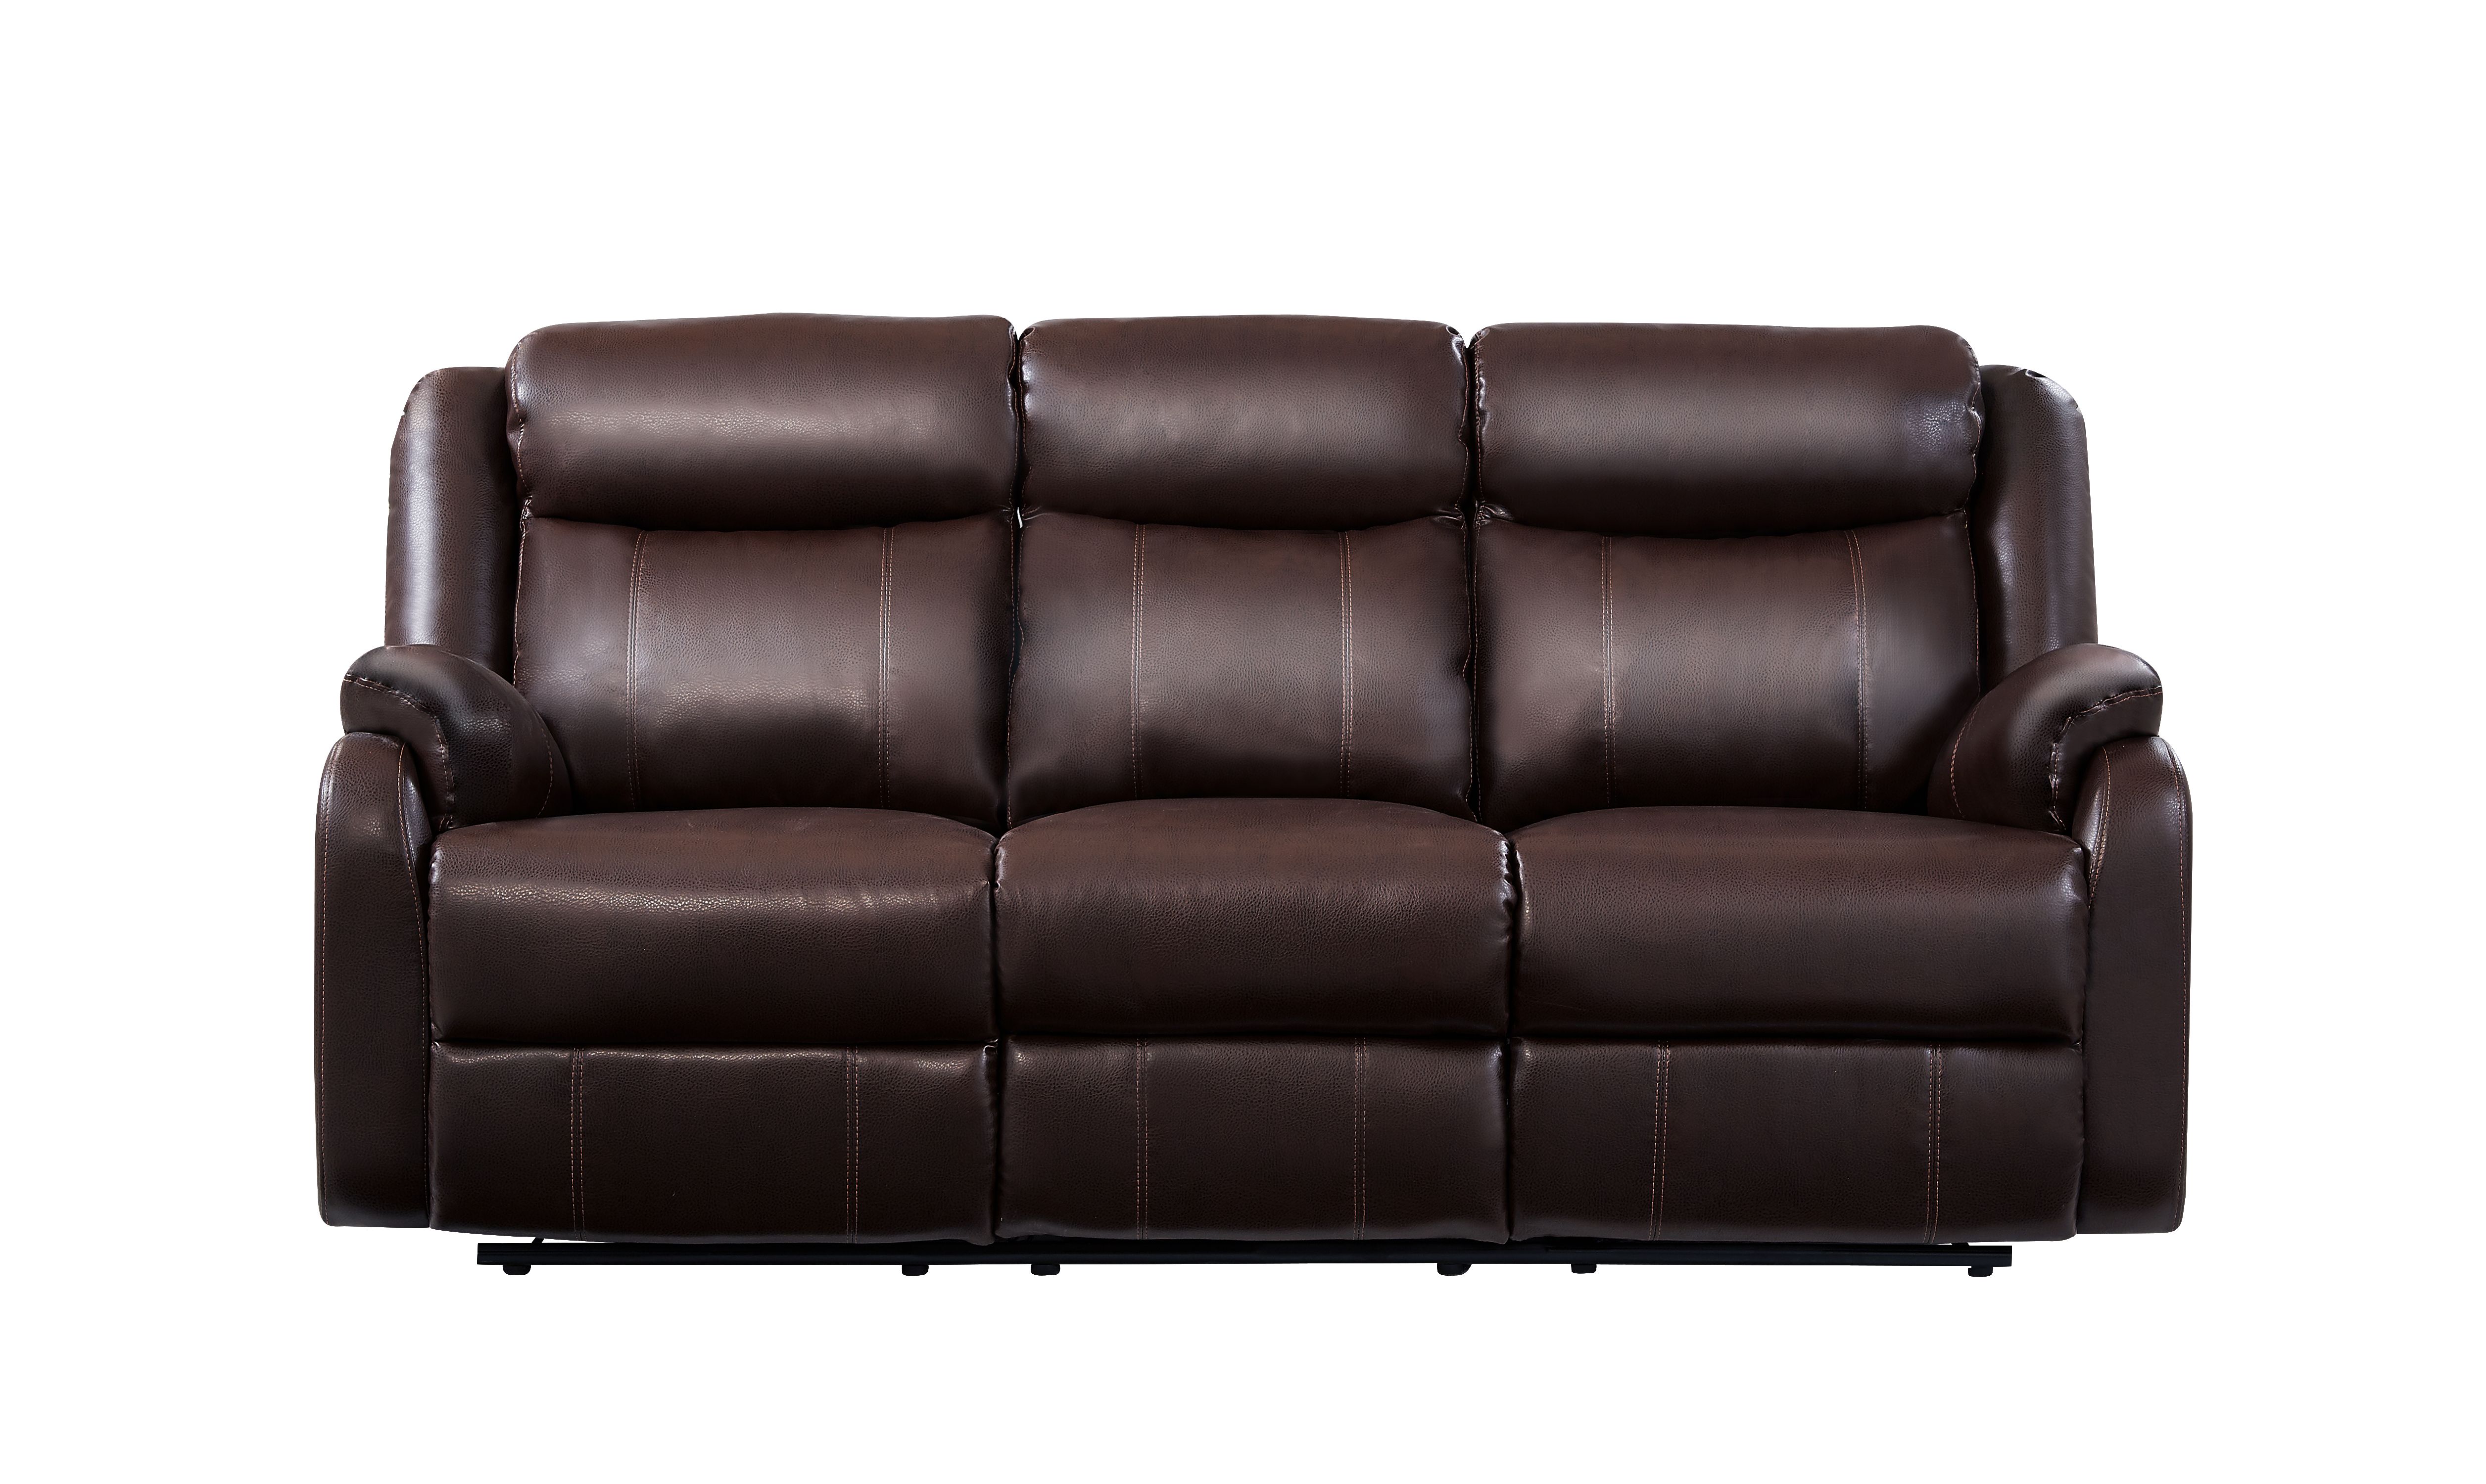 Drawer Reclining Sofa in Brown - image 1 of 10